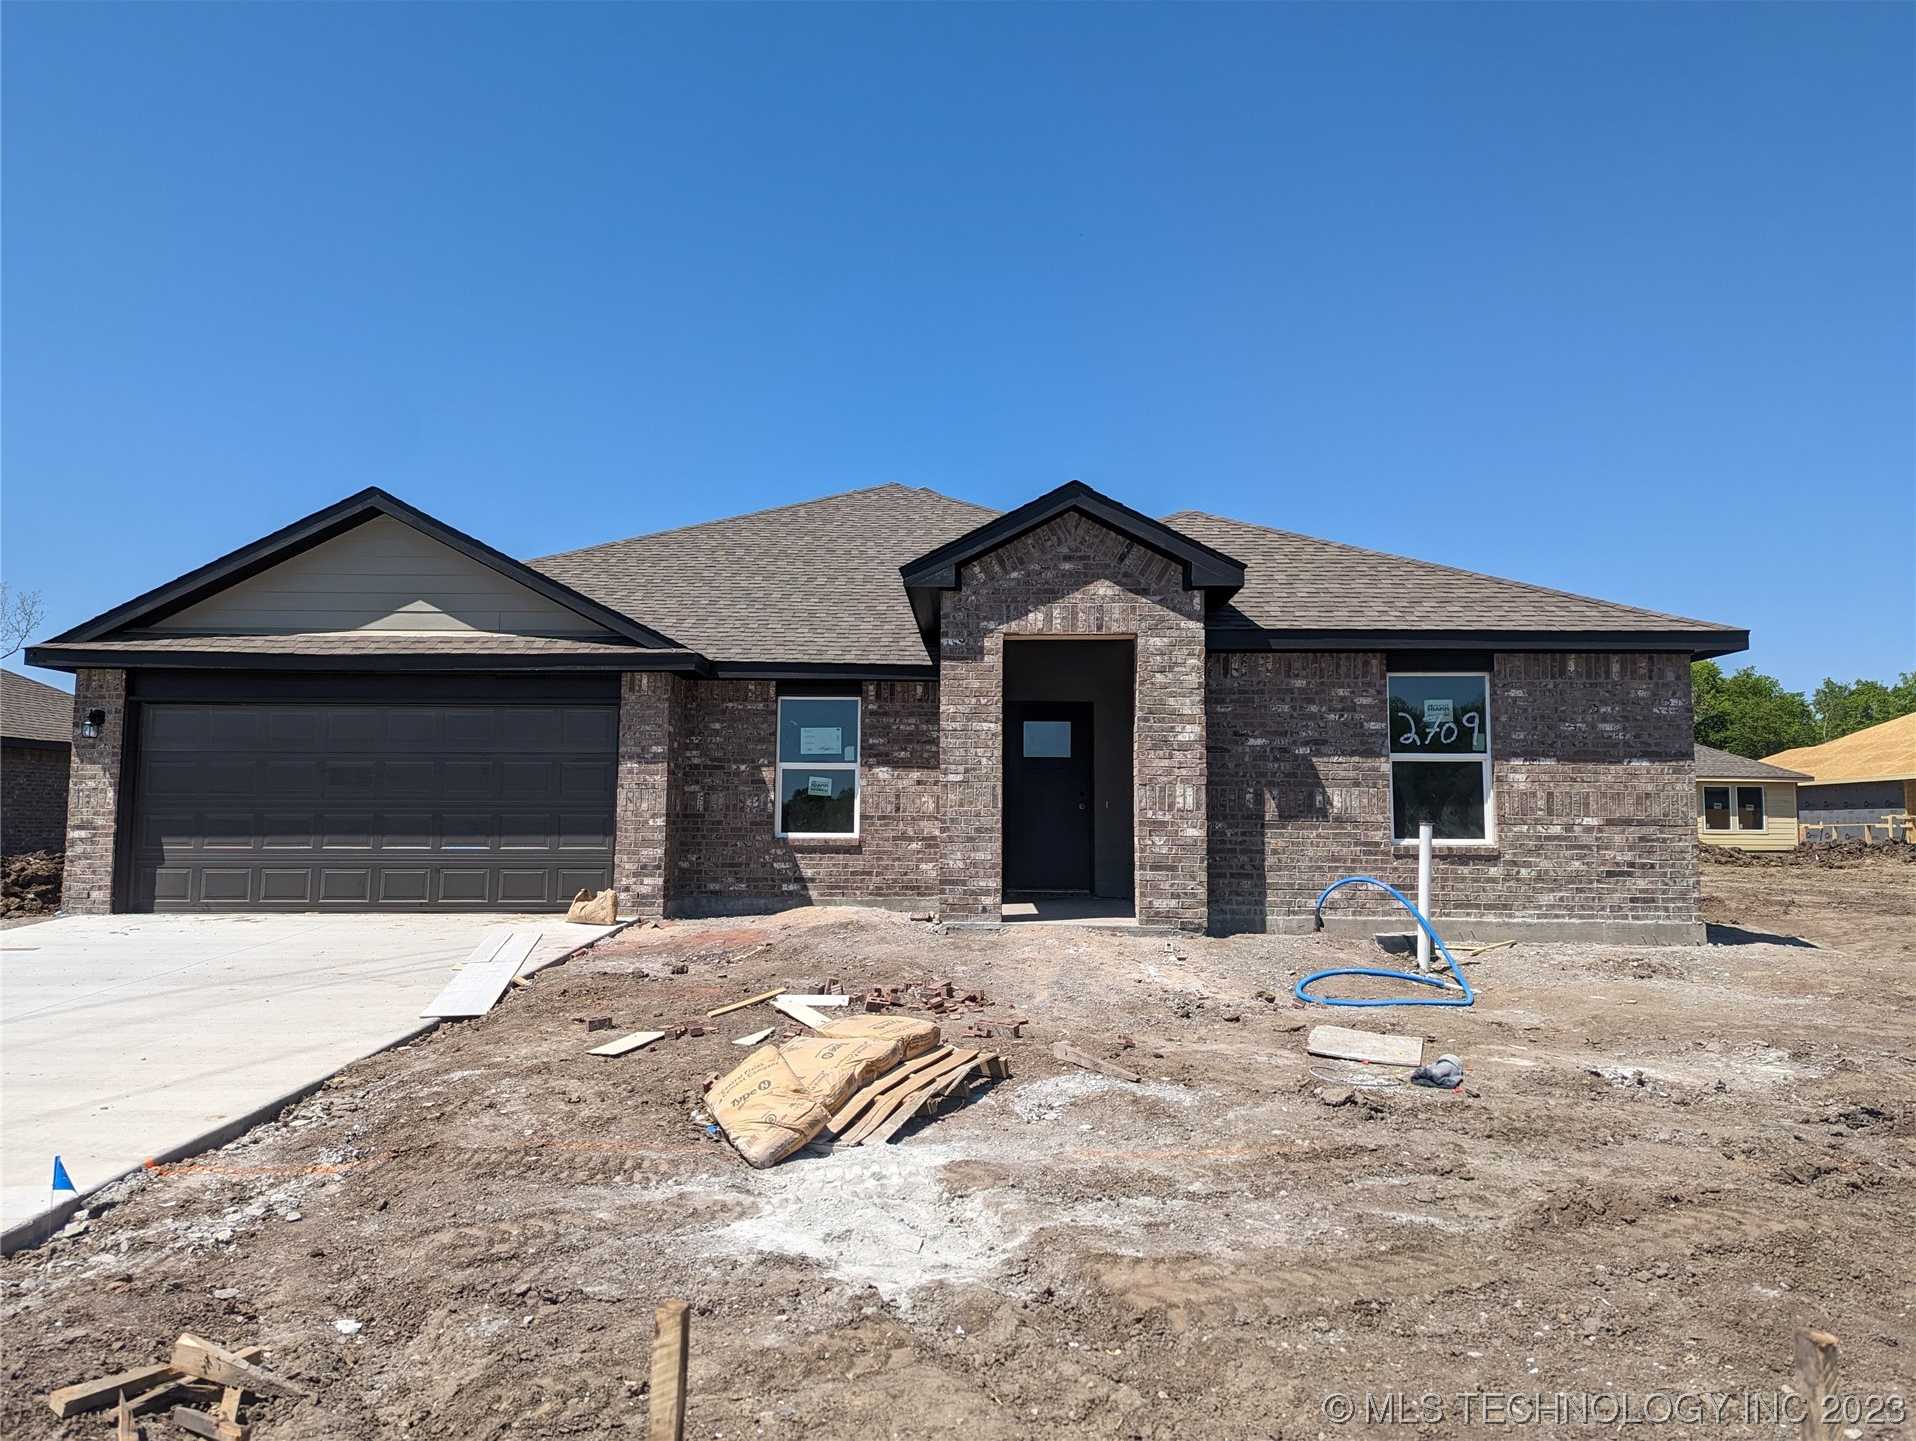 View Claremore, OK 74017 house